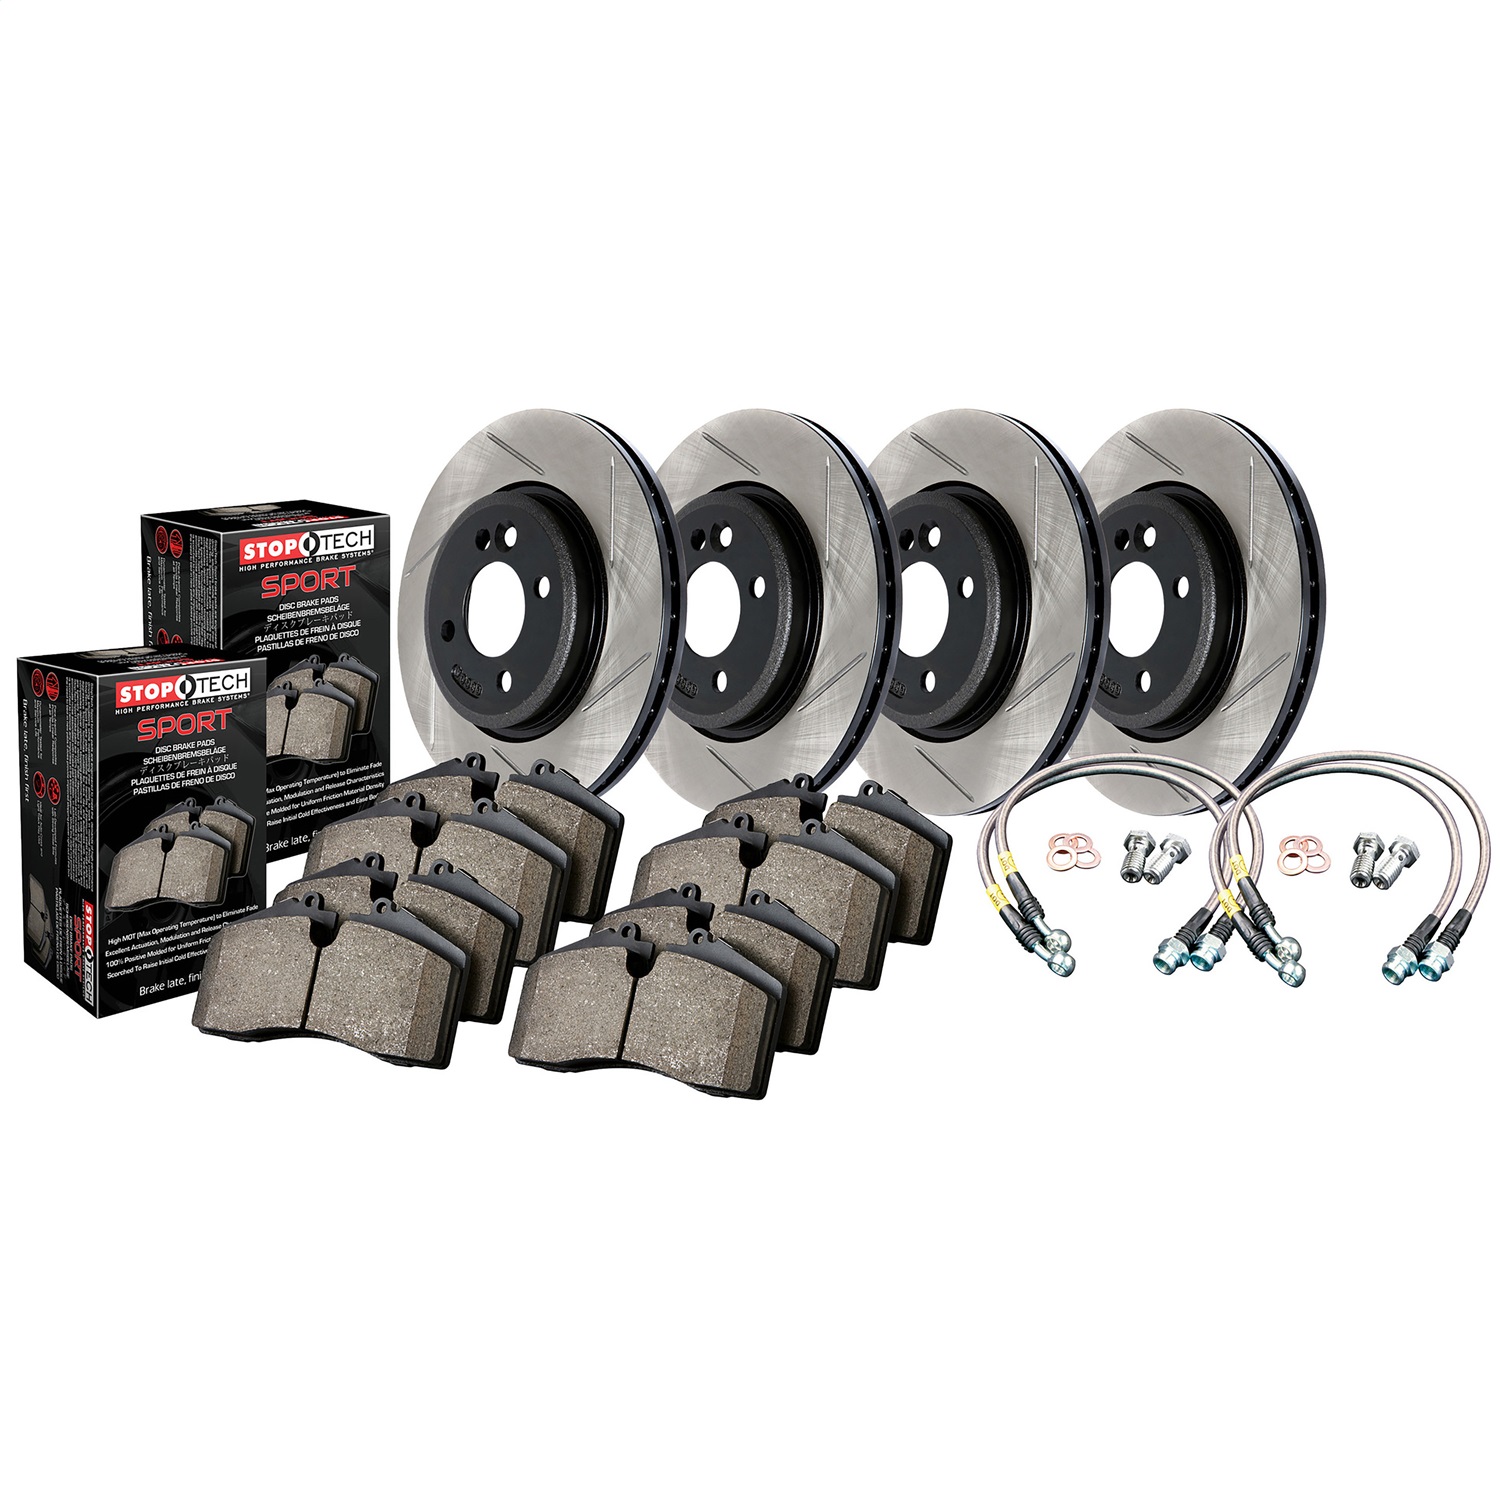 StopTech 977.33018 Sport Disc Brake Kit w/Slotted Rotors